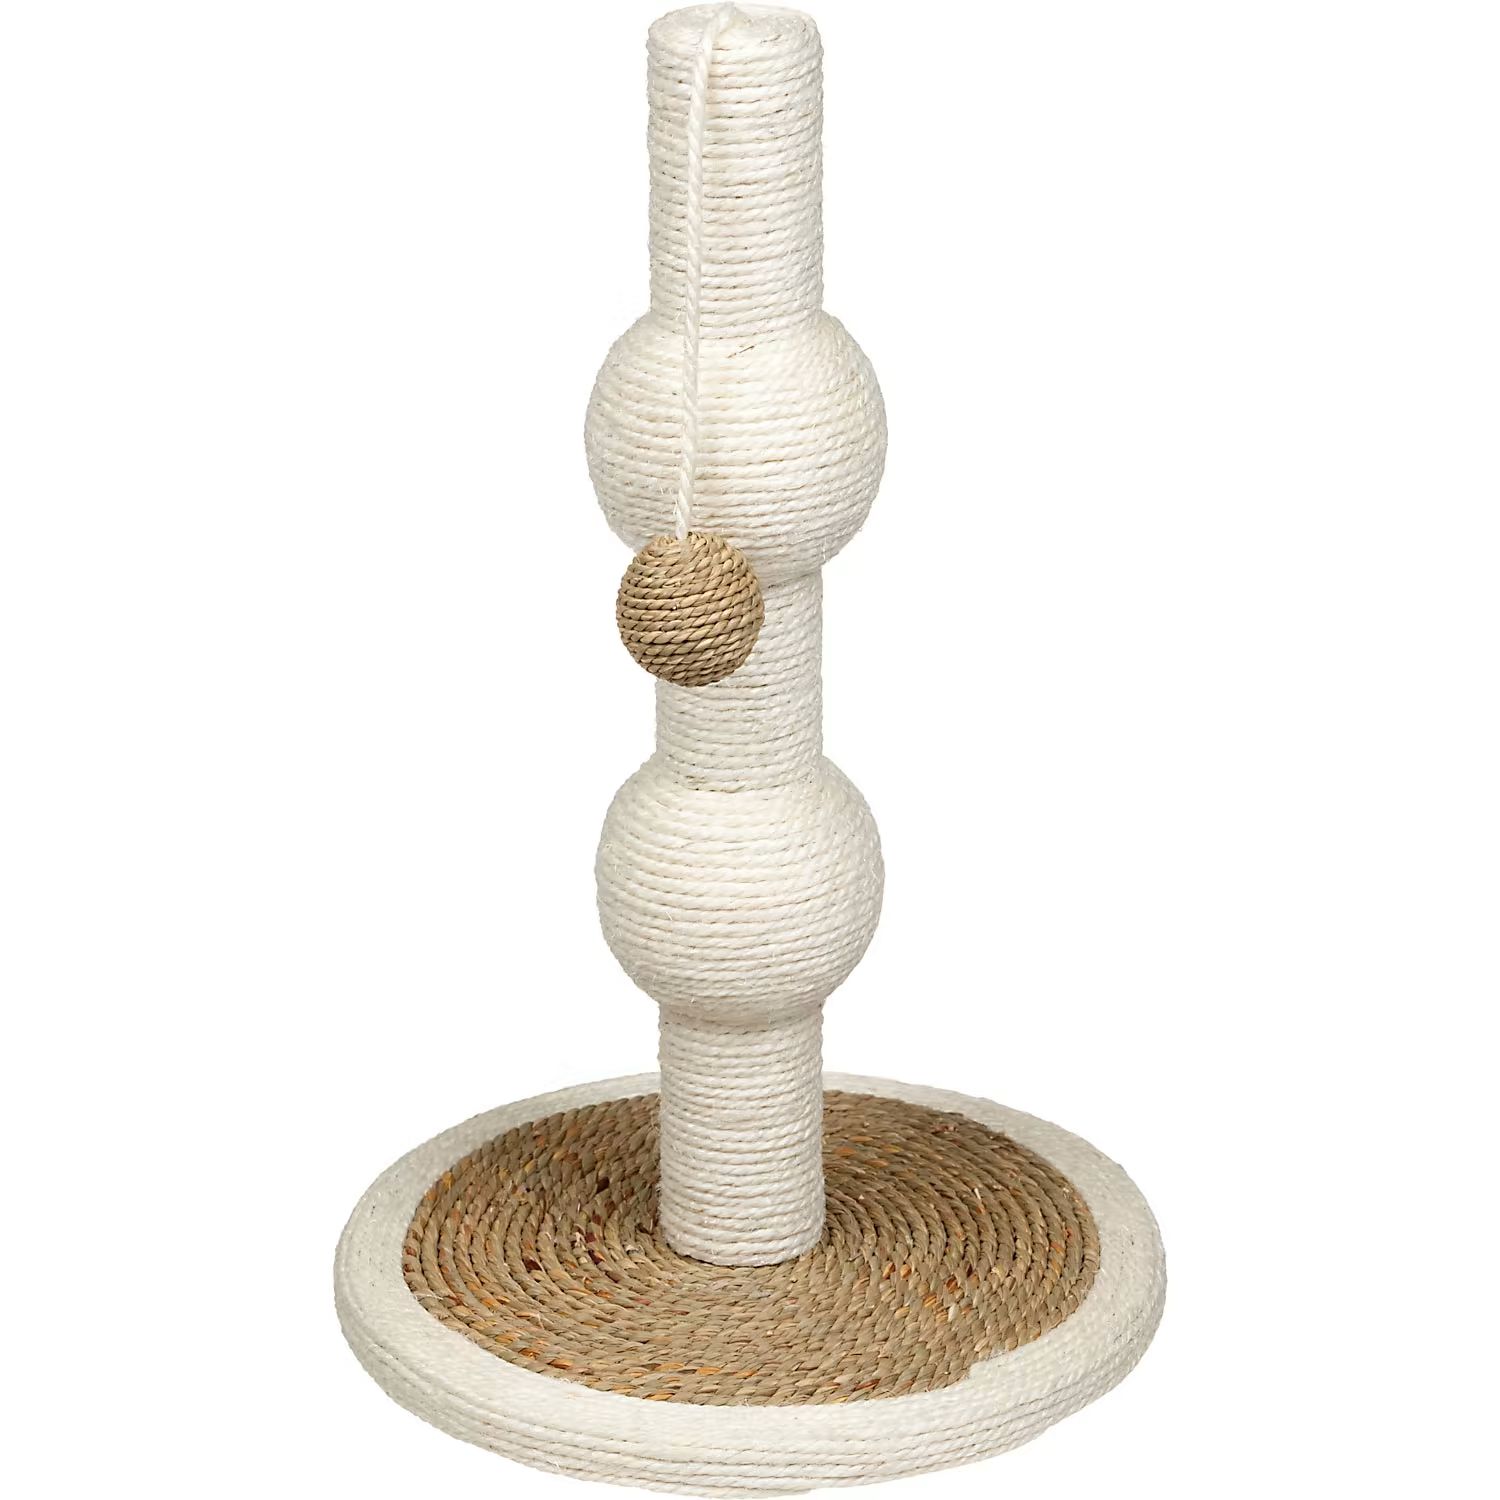 EveryYay Sisal and Seagrass Orb Cat Scratching Post, 18" H | Petco